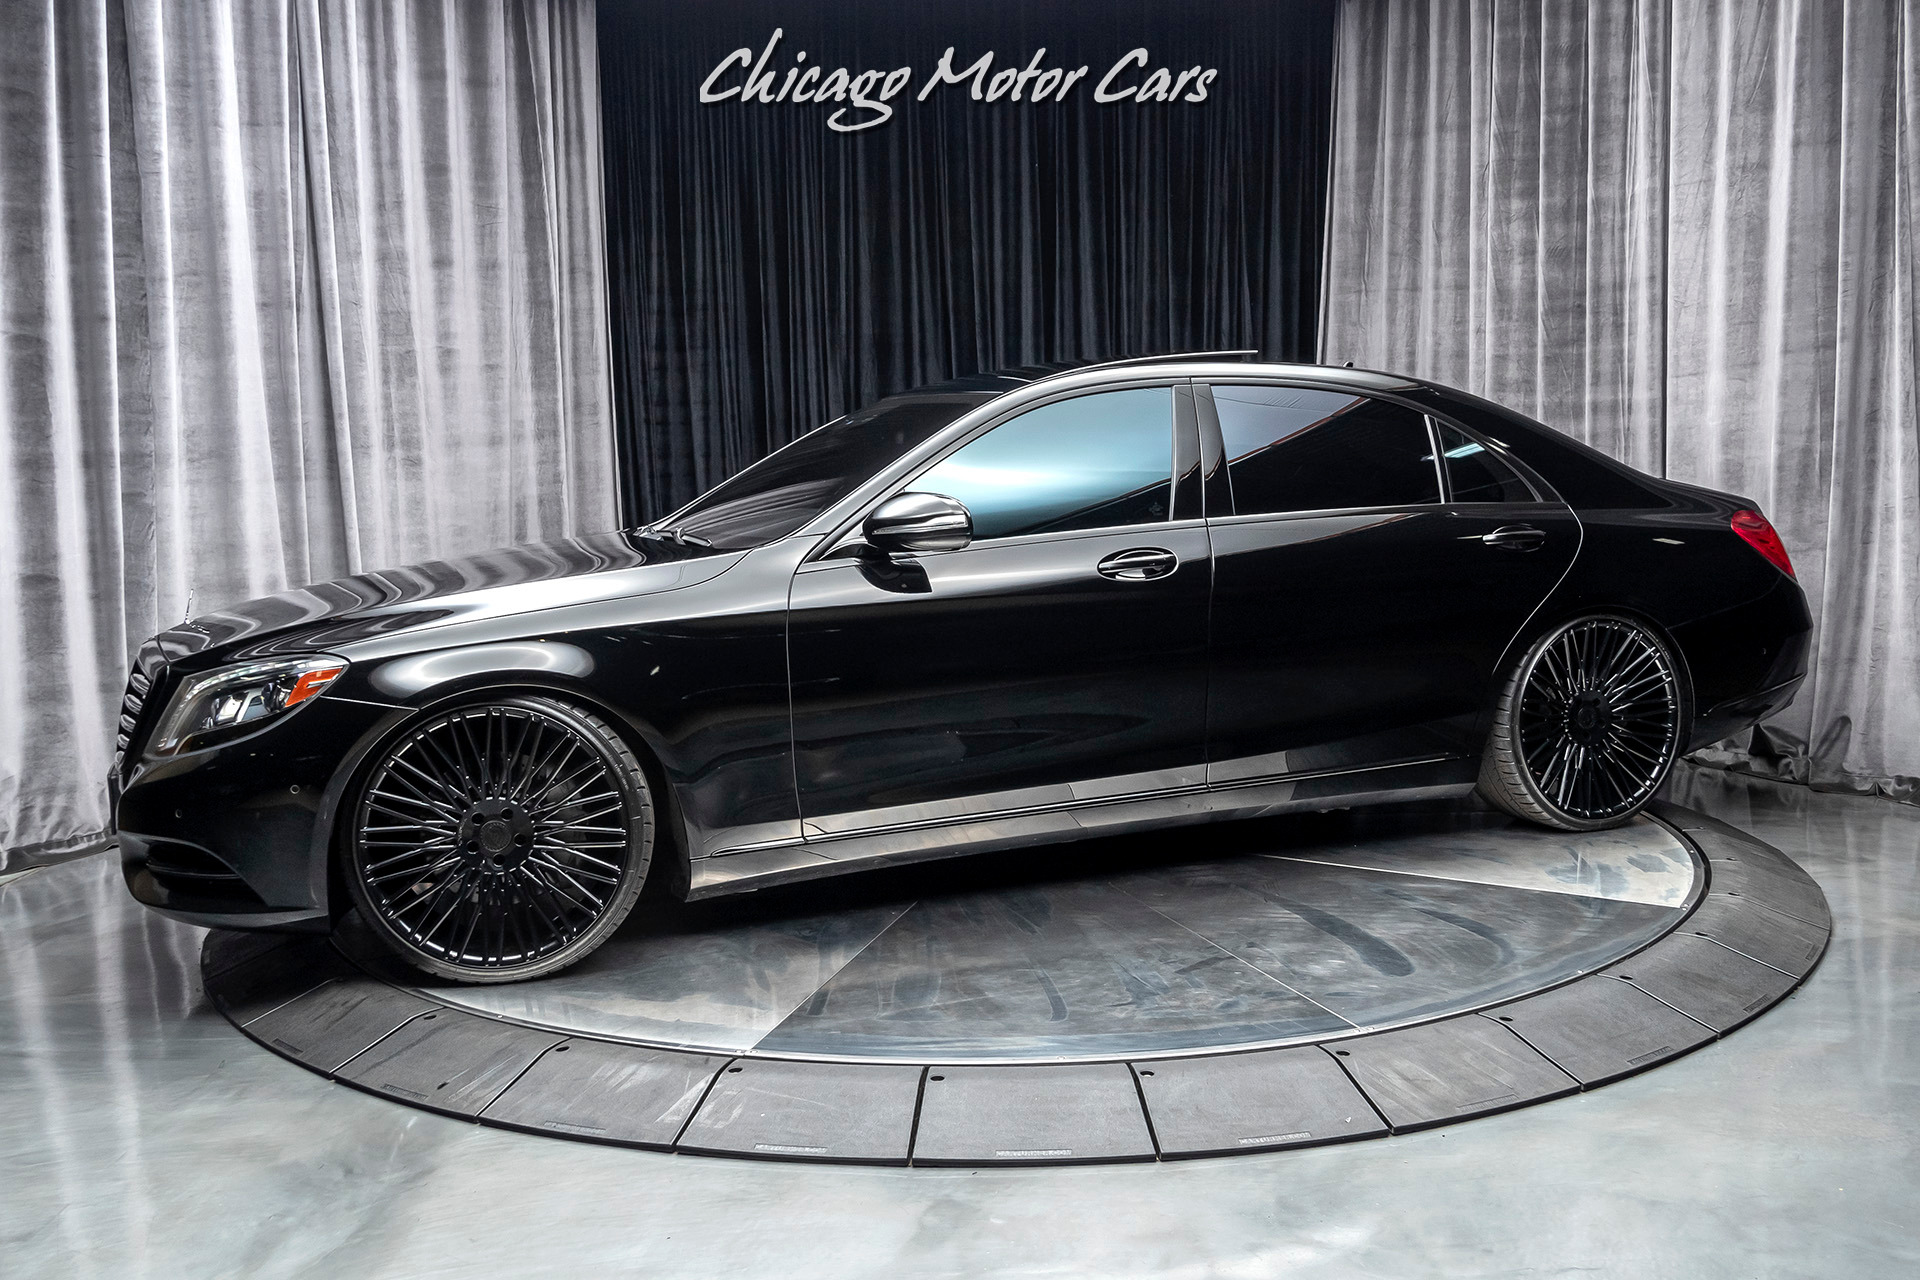 Used 2015 Mercedes Benz S Class S 550 103k Msrp 22 Black Forgiato